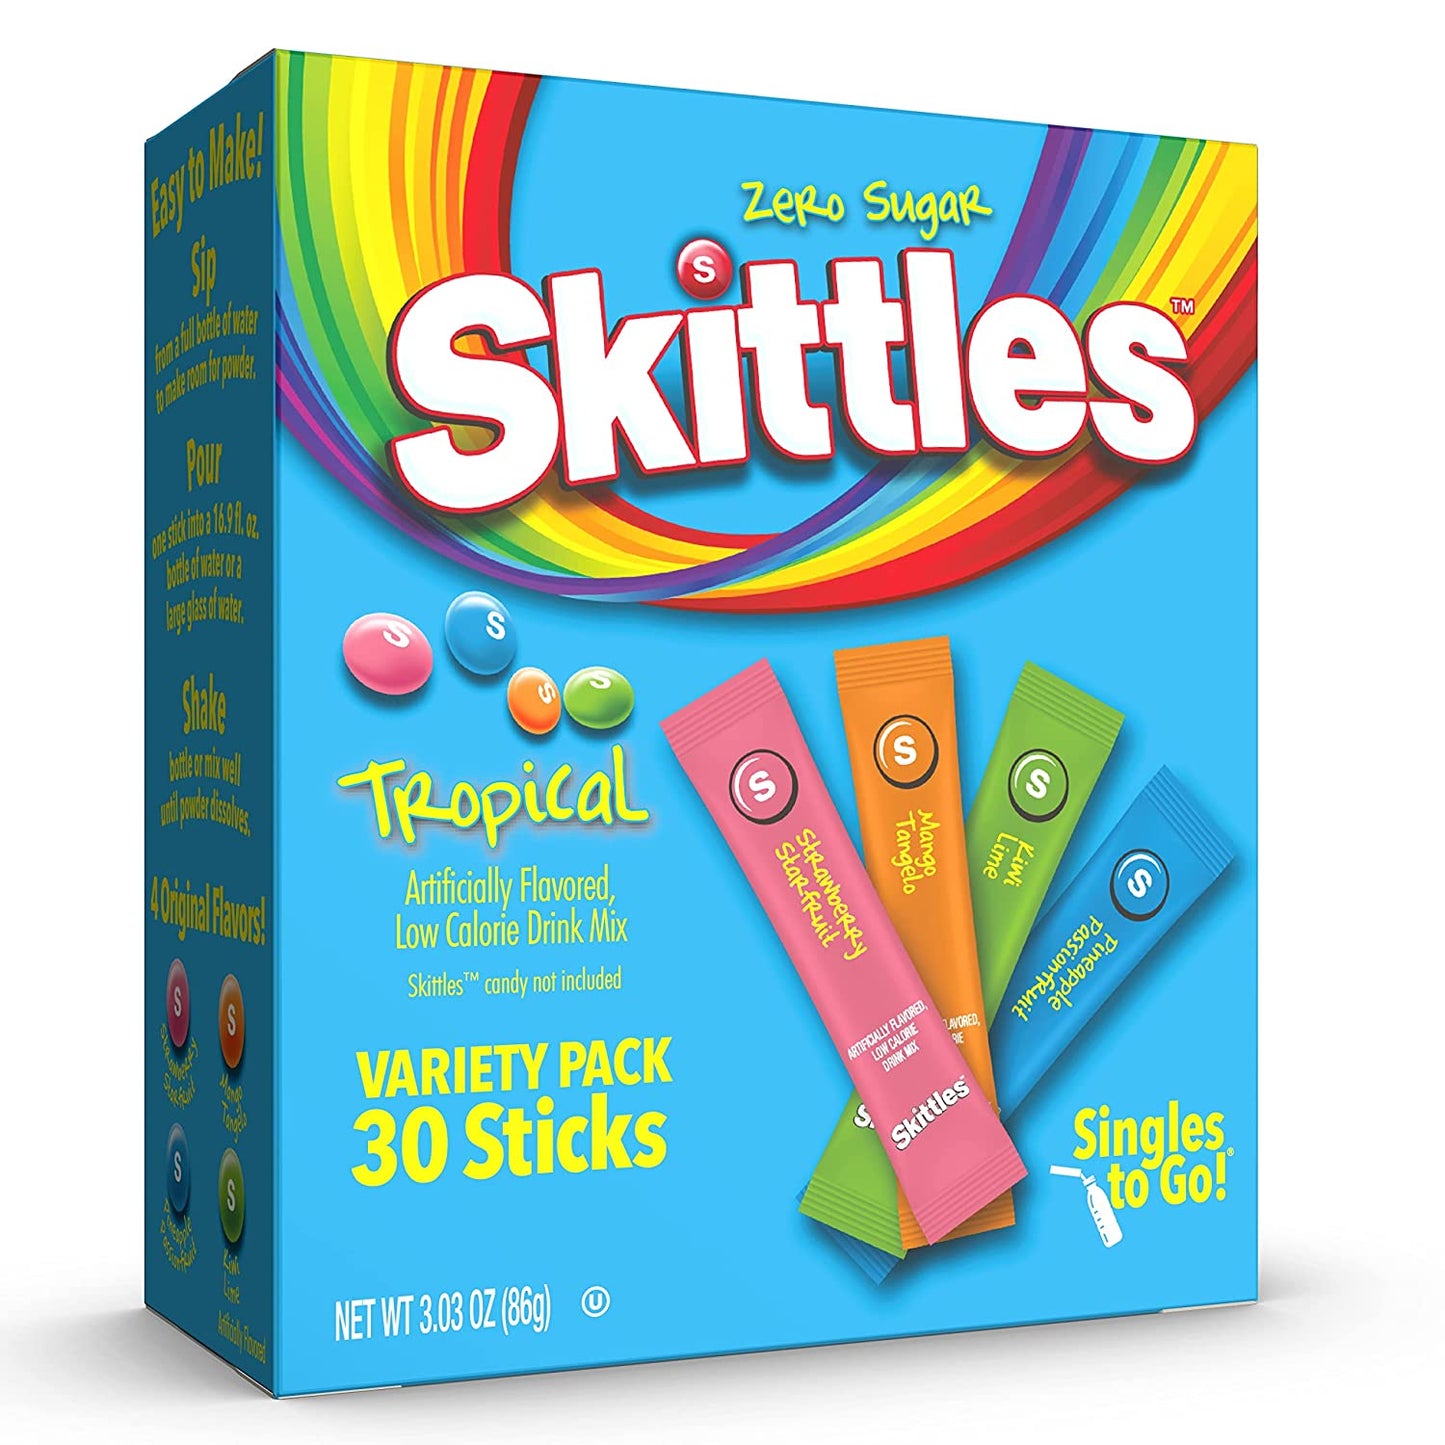 Skittles Singles To Go Tropical Flavors Variety Pack, Powdered Drink Mix, Includes 4 Flavors, Strawberry Starfruit, Mango Tangelo, Kiwi Lime, Pineapple Passionfruit, 1 Box (30 Single Servings)